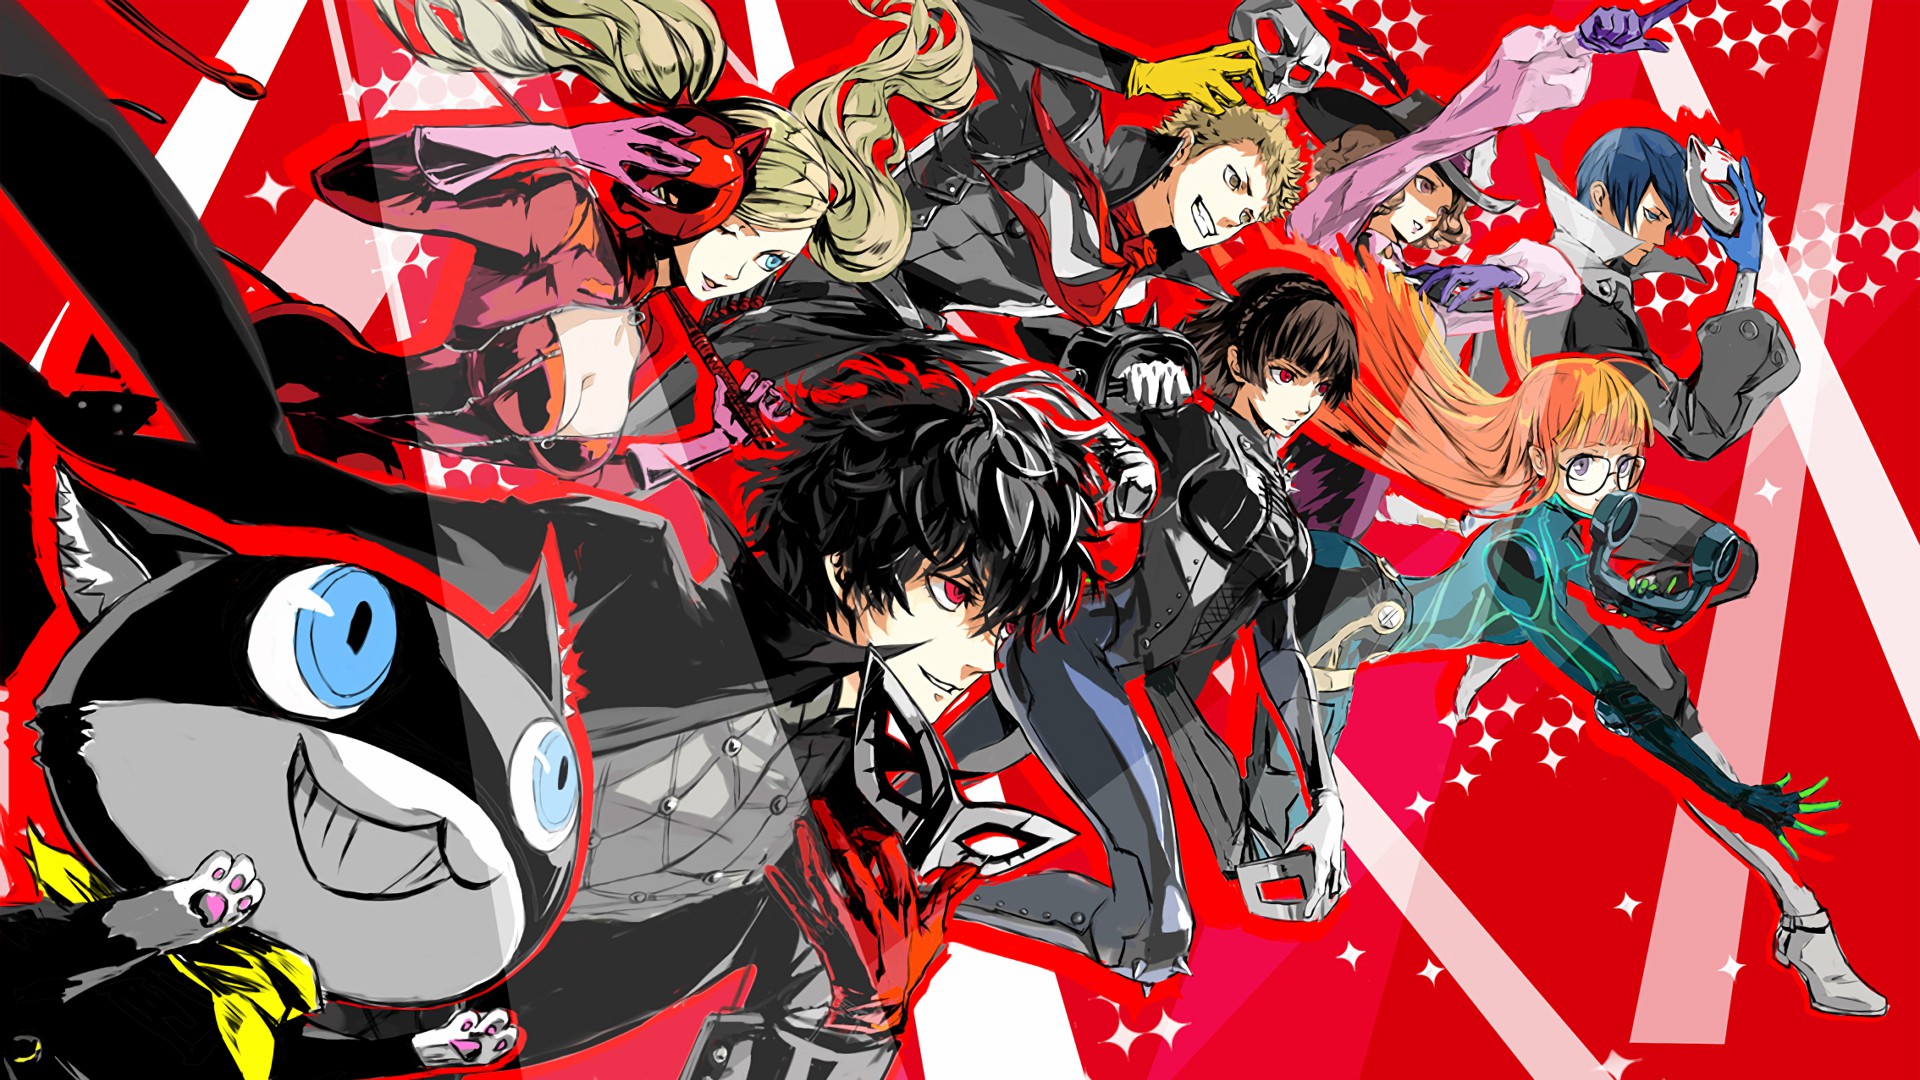 p5r-persona-5-royal-images-launchbox-games-database